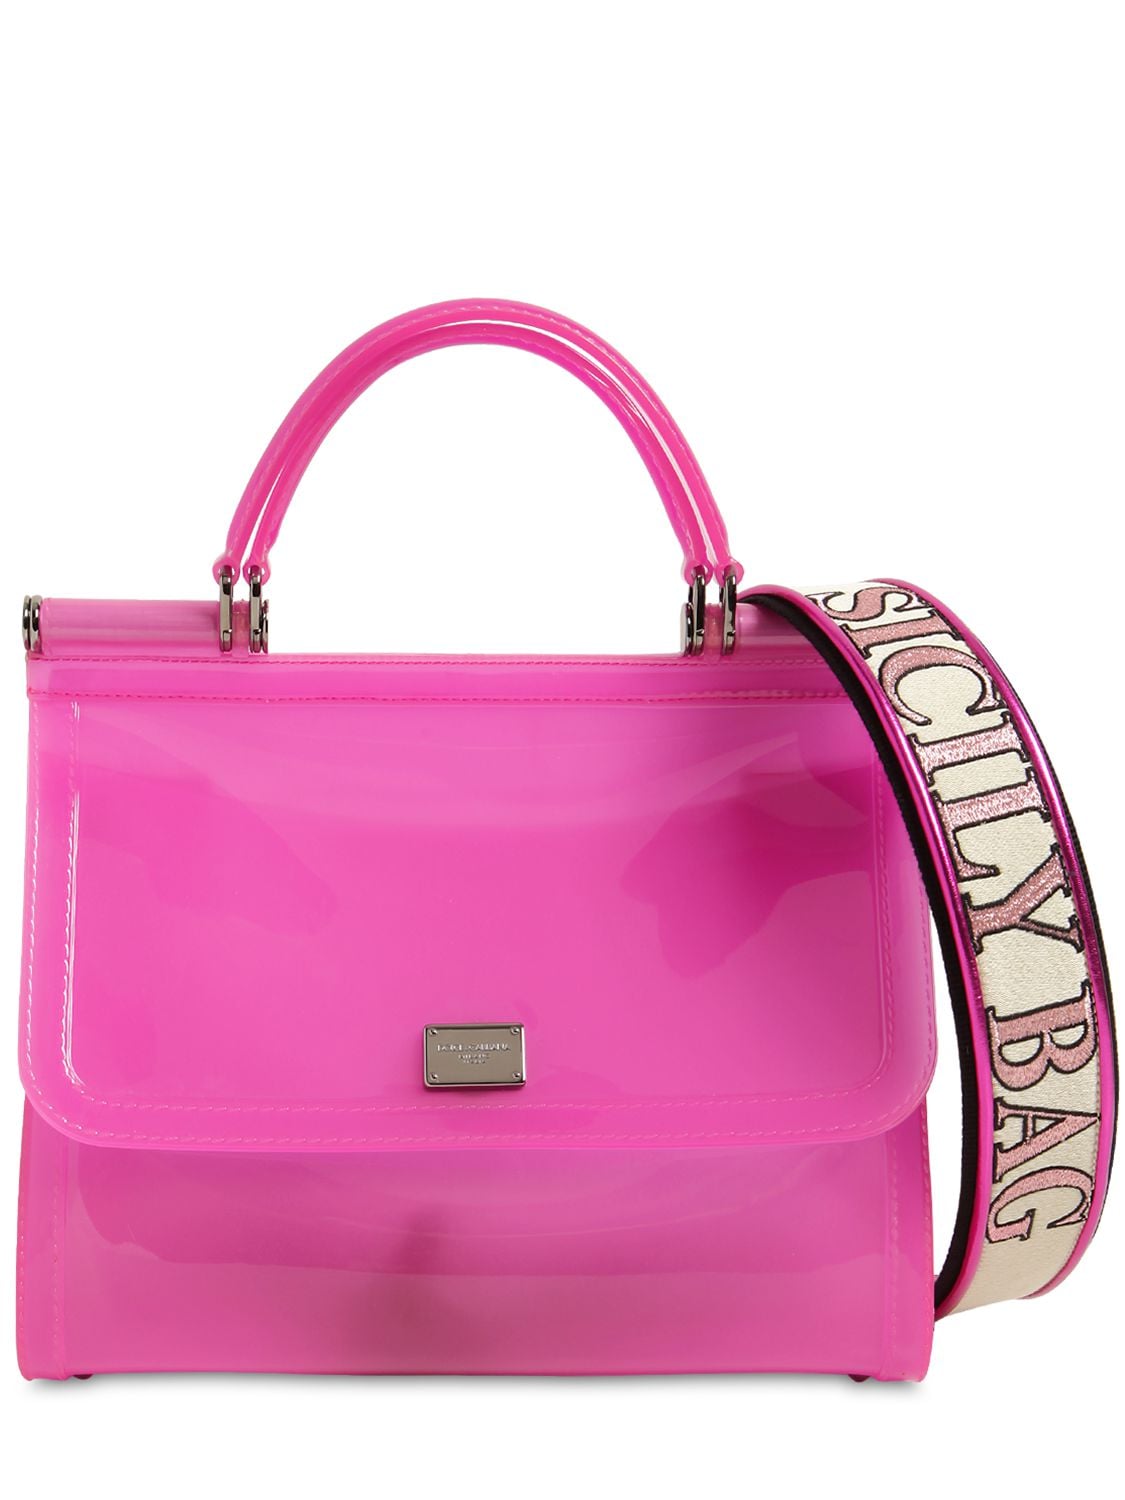 Dolce & Gabbana Sicily Faux Patent Leather Bag In Pink